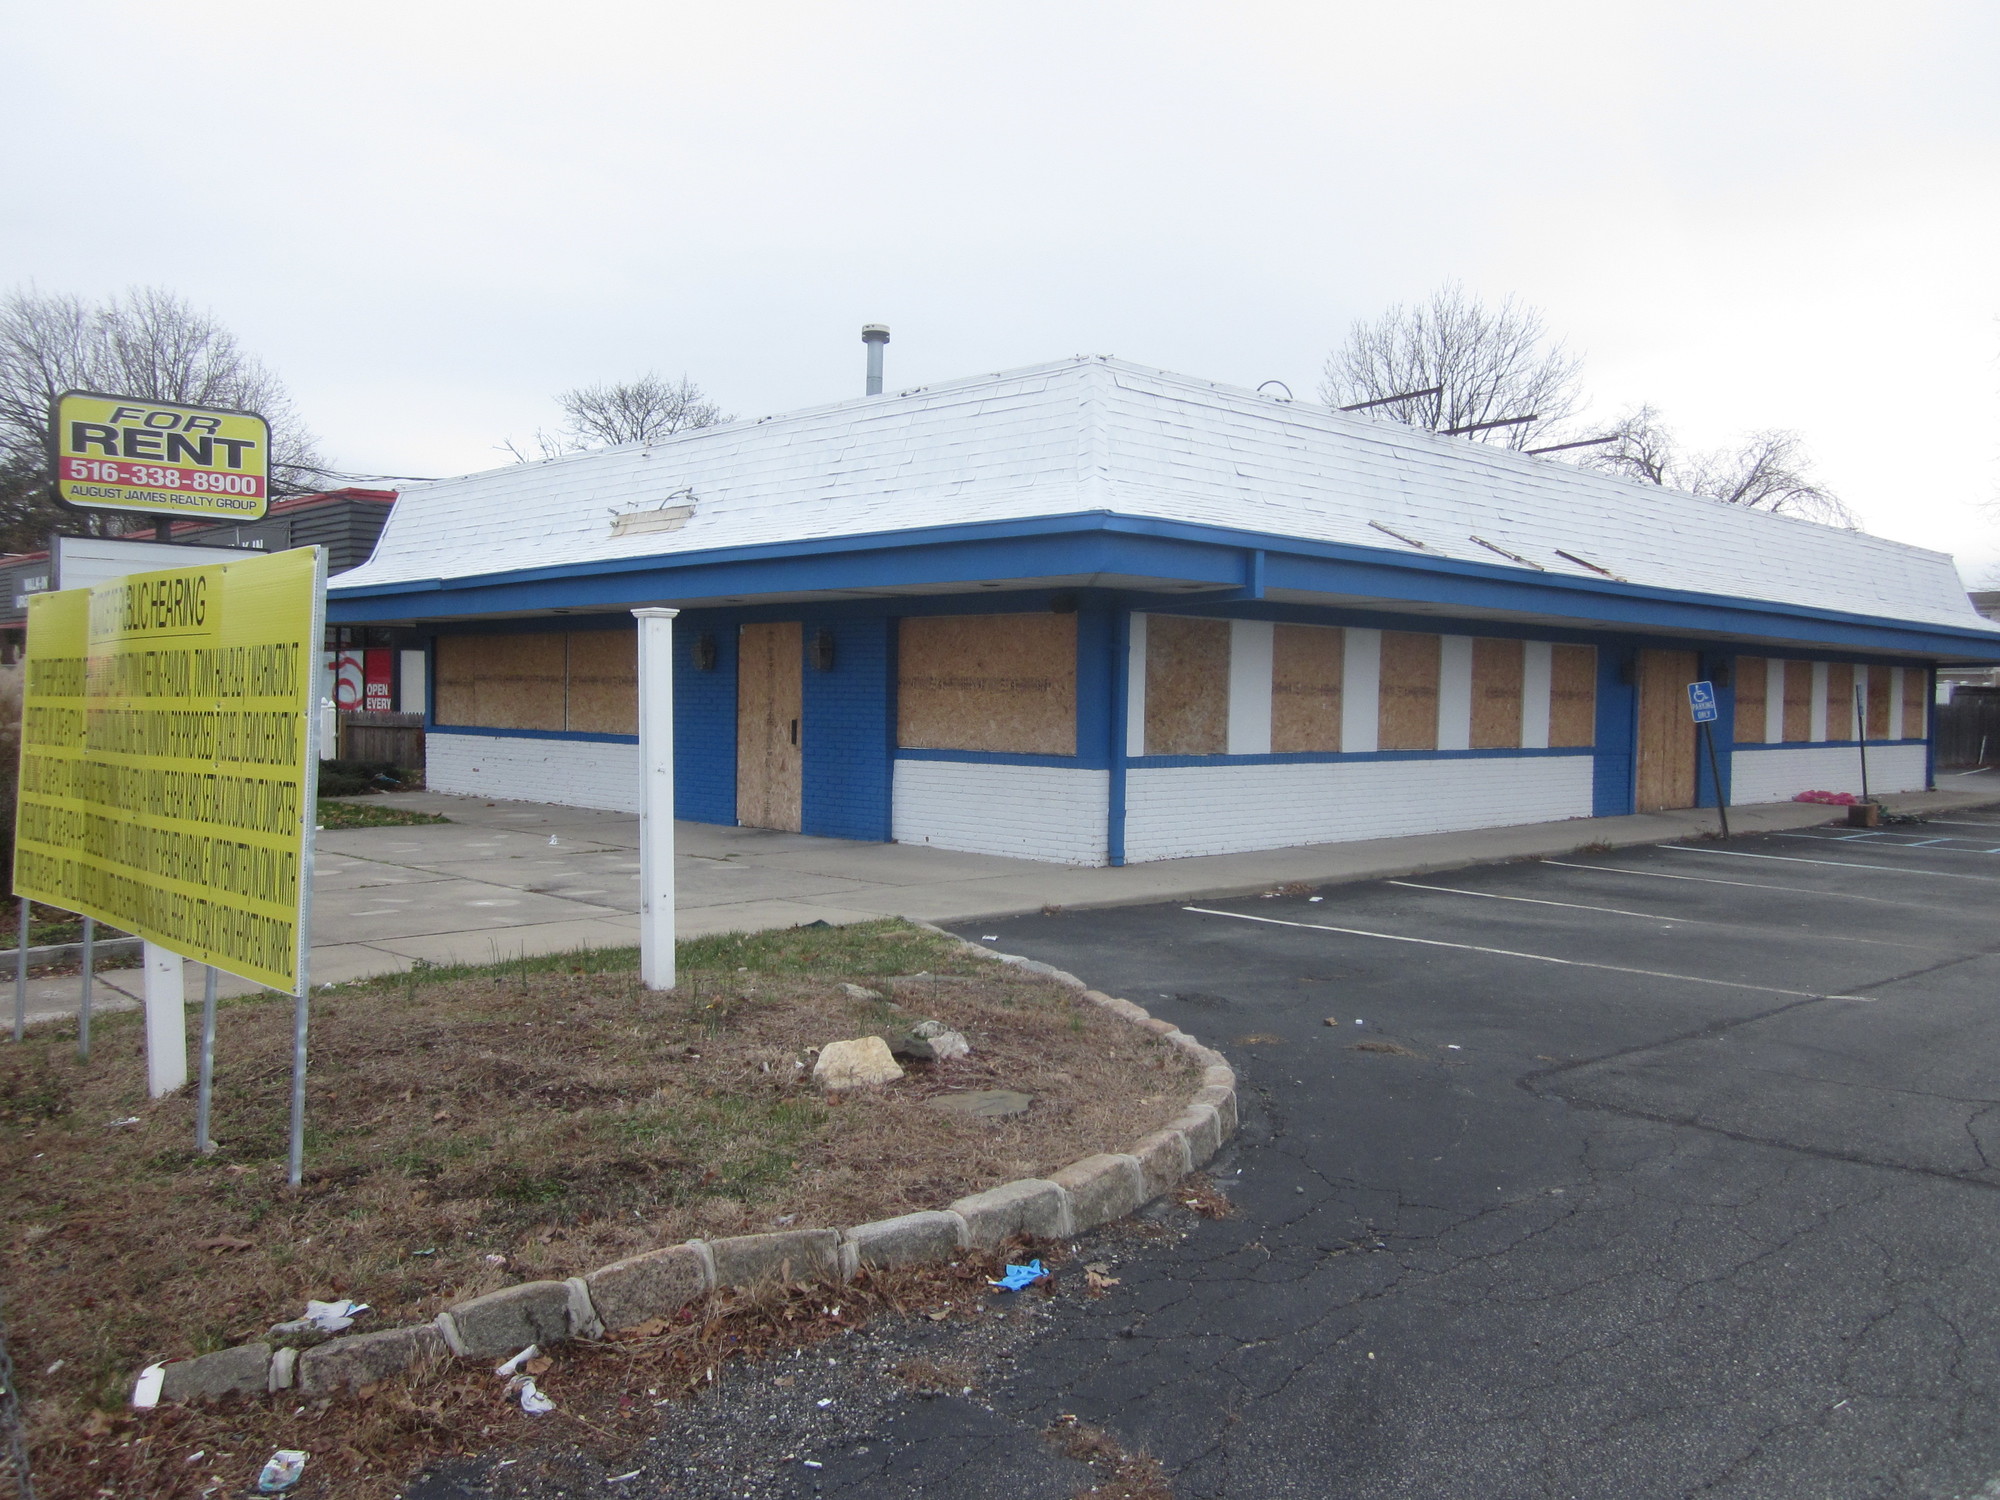 A proposal to construct a Taco Bell with a drive-through at 1939 Hempstead Turnpike is currently before the Town of Hempstead’s Board of Appeals, to the chagrin of many residents.  A public hearing to discuss the matter is scheduled for Feb. 11 at town hall.